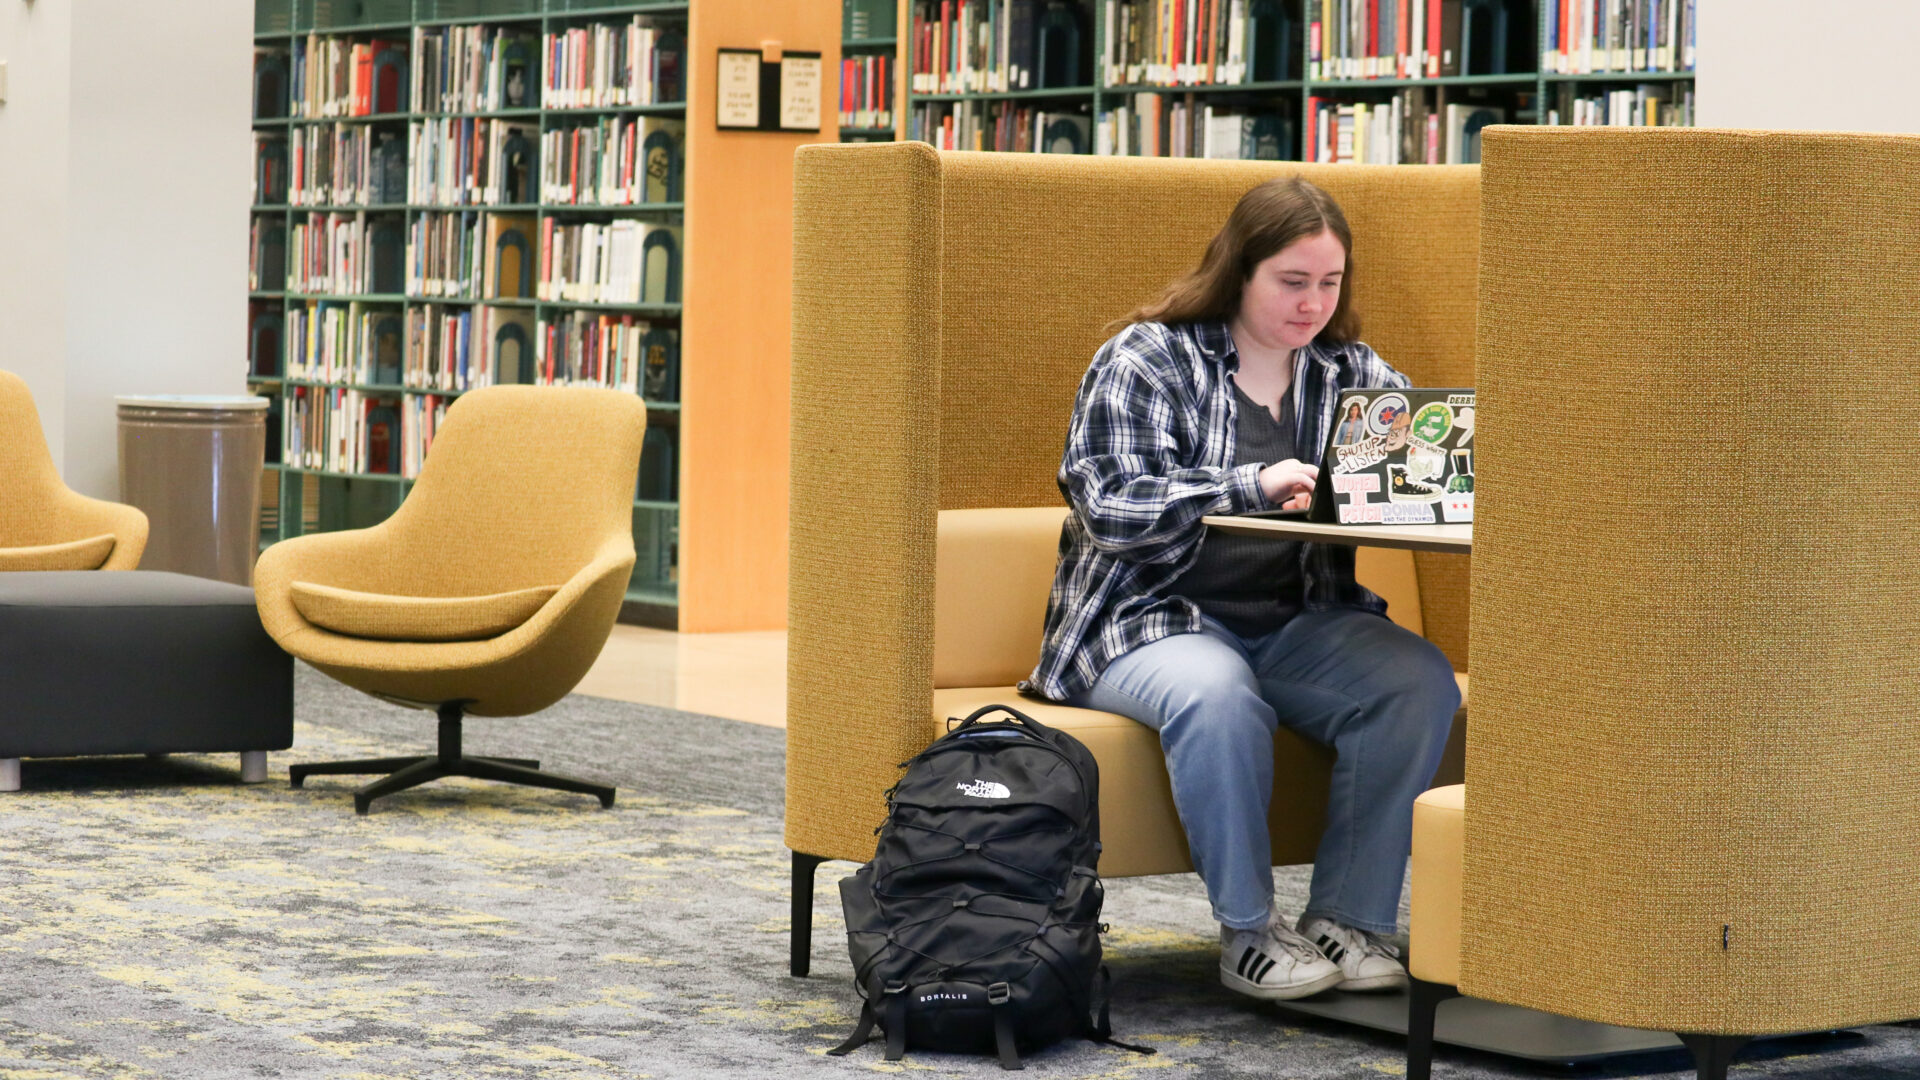 Girl Studying in Library 